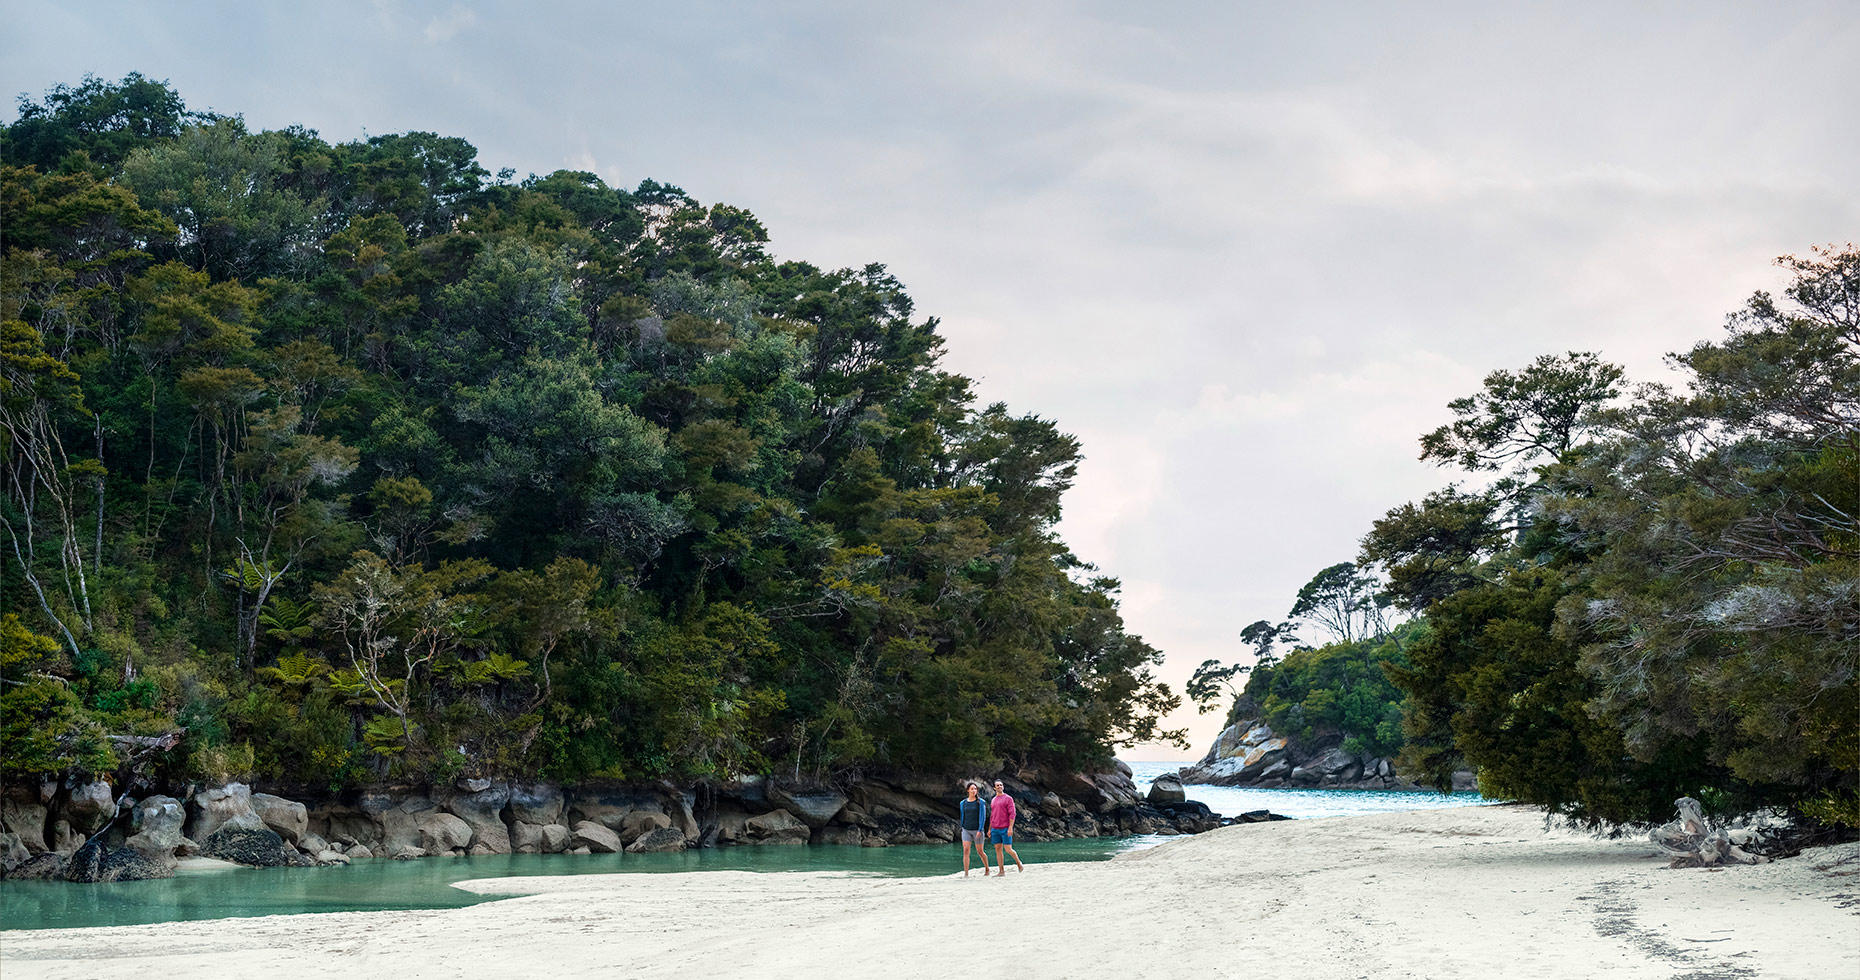 Photography of Abel Tasman by Commercial Photographer Fraser Clements for Tourism New Zealand 100% pure. Close to Nelson New Zealand.